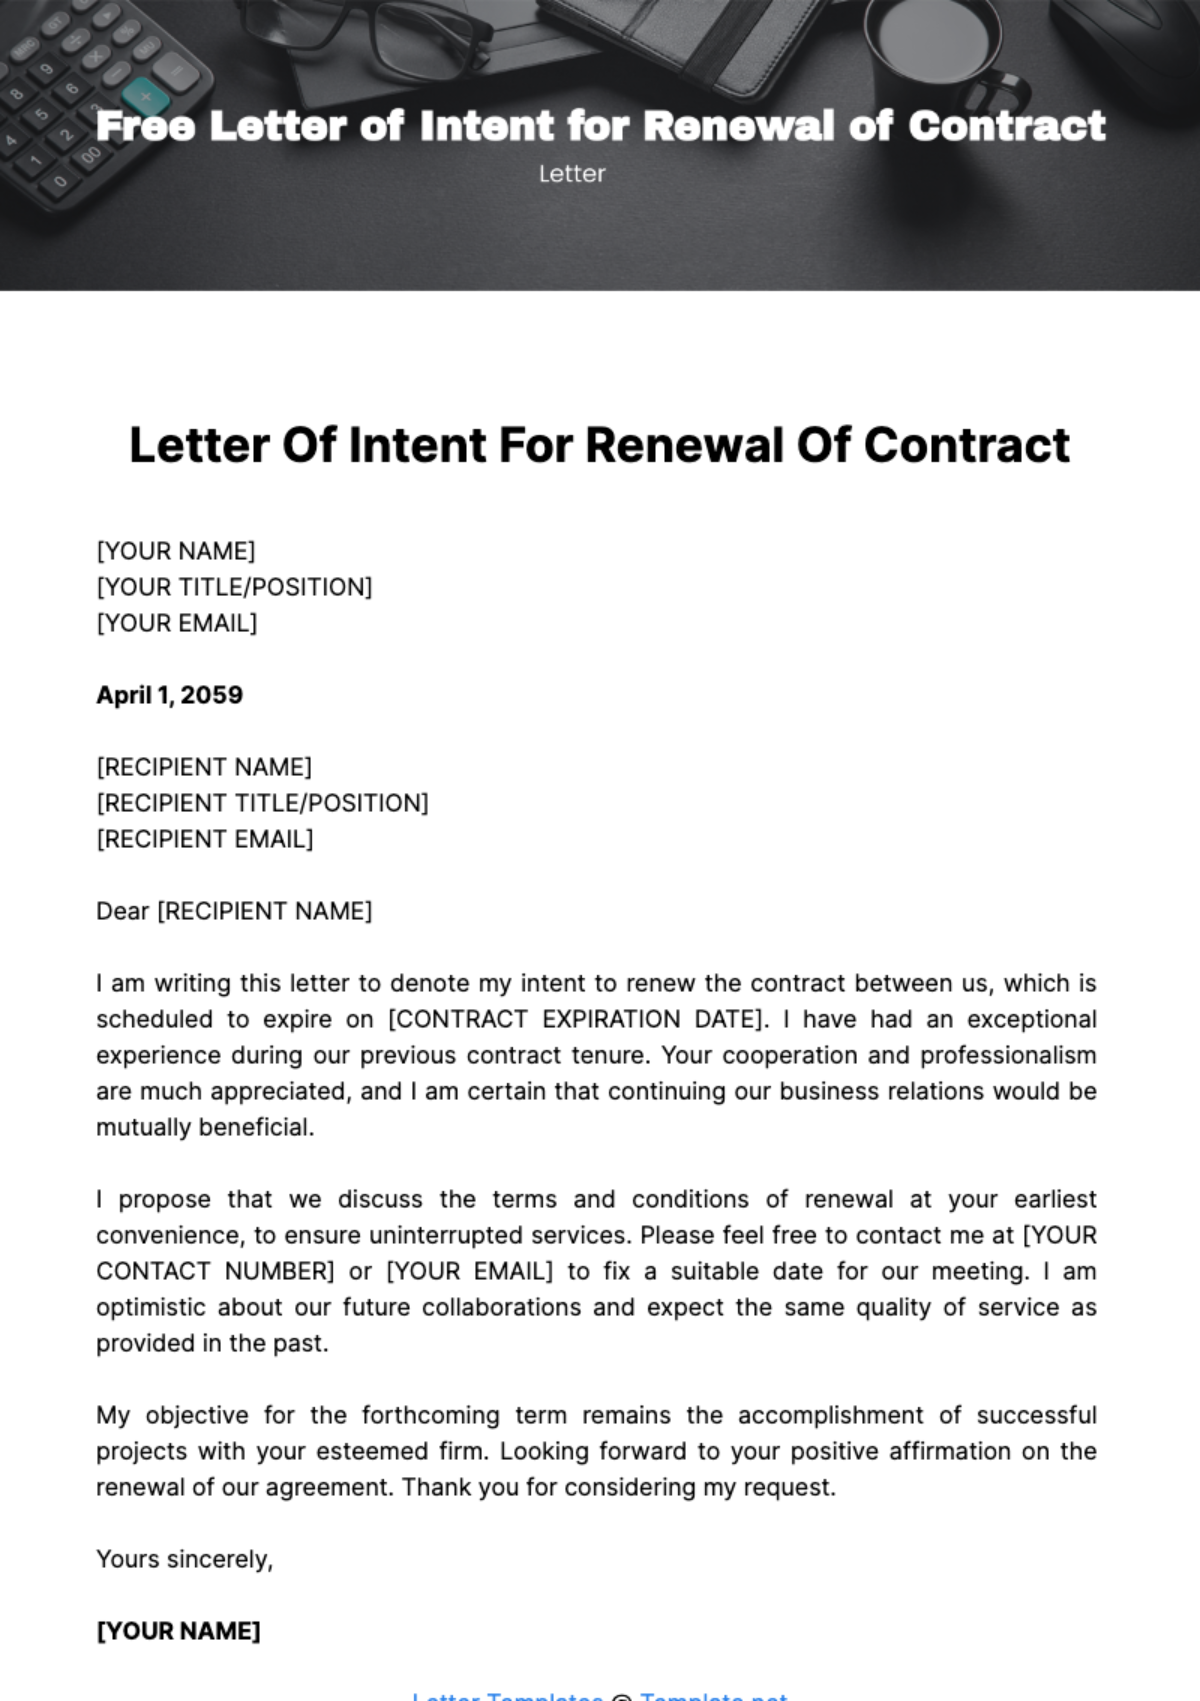 Free Letter of Intent for Renewal of Contract Template